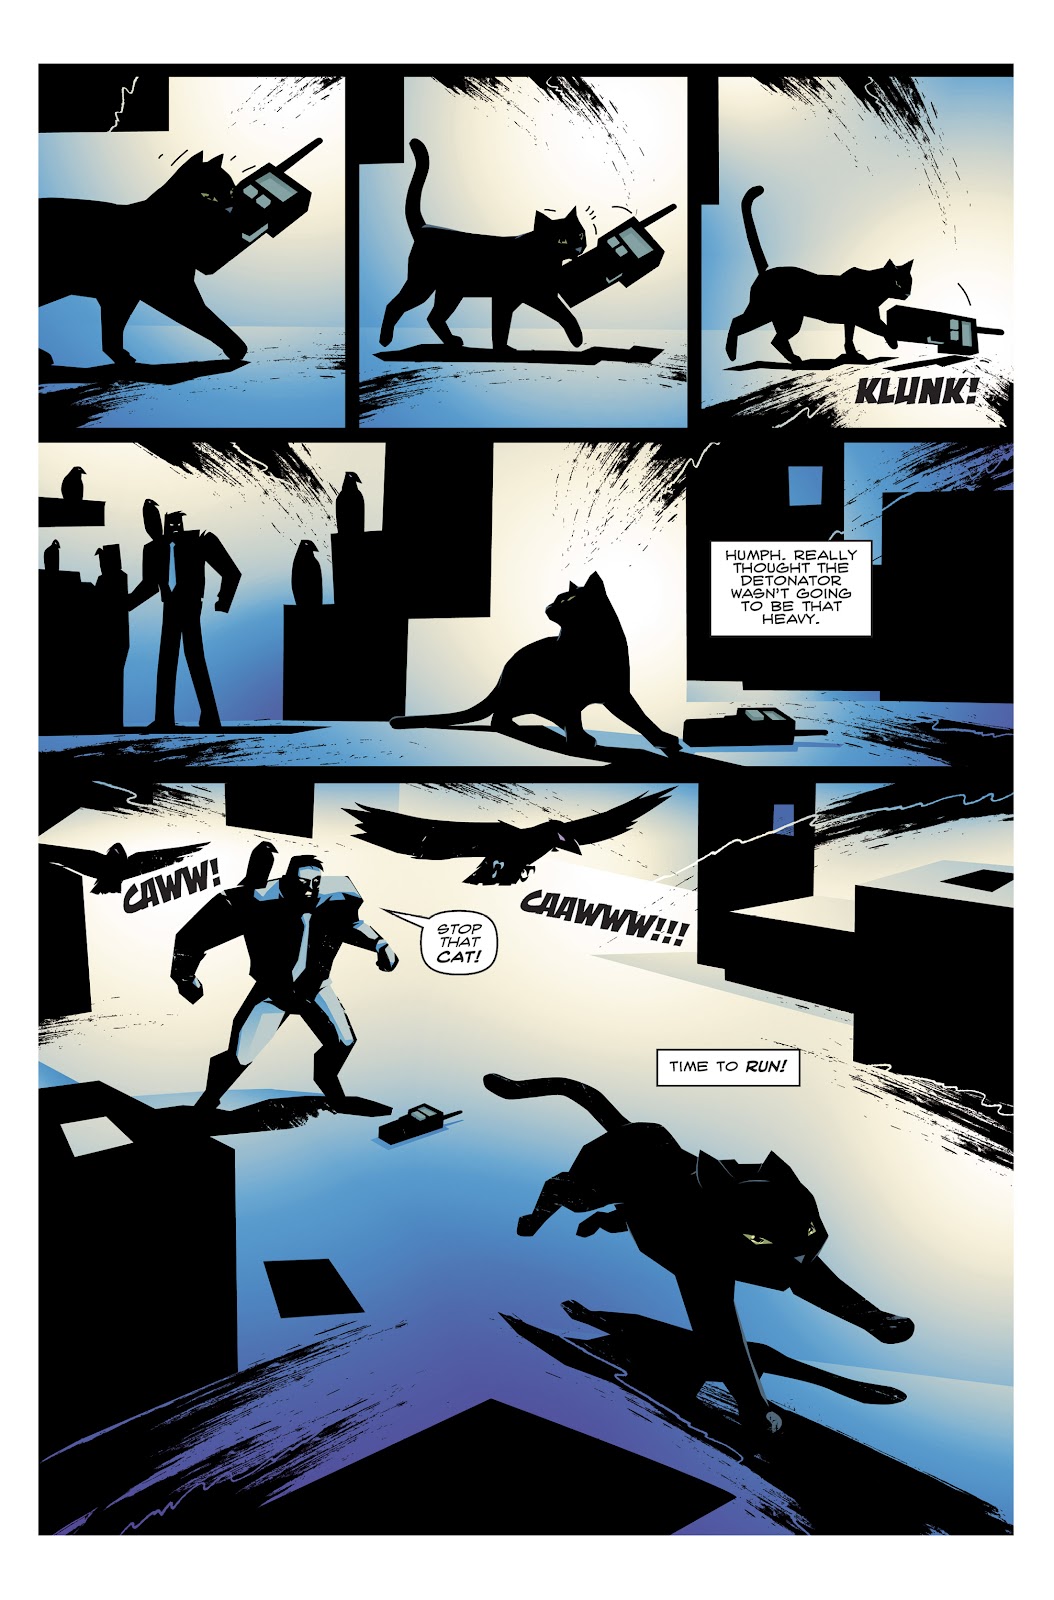 Hero Cats: Midnight Over Stellar City Vol. 2 issue 1 - Page 17